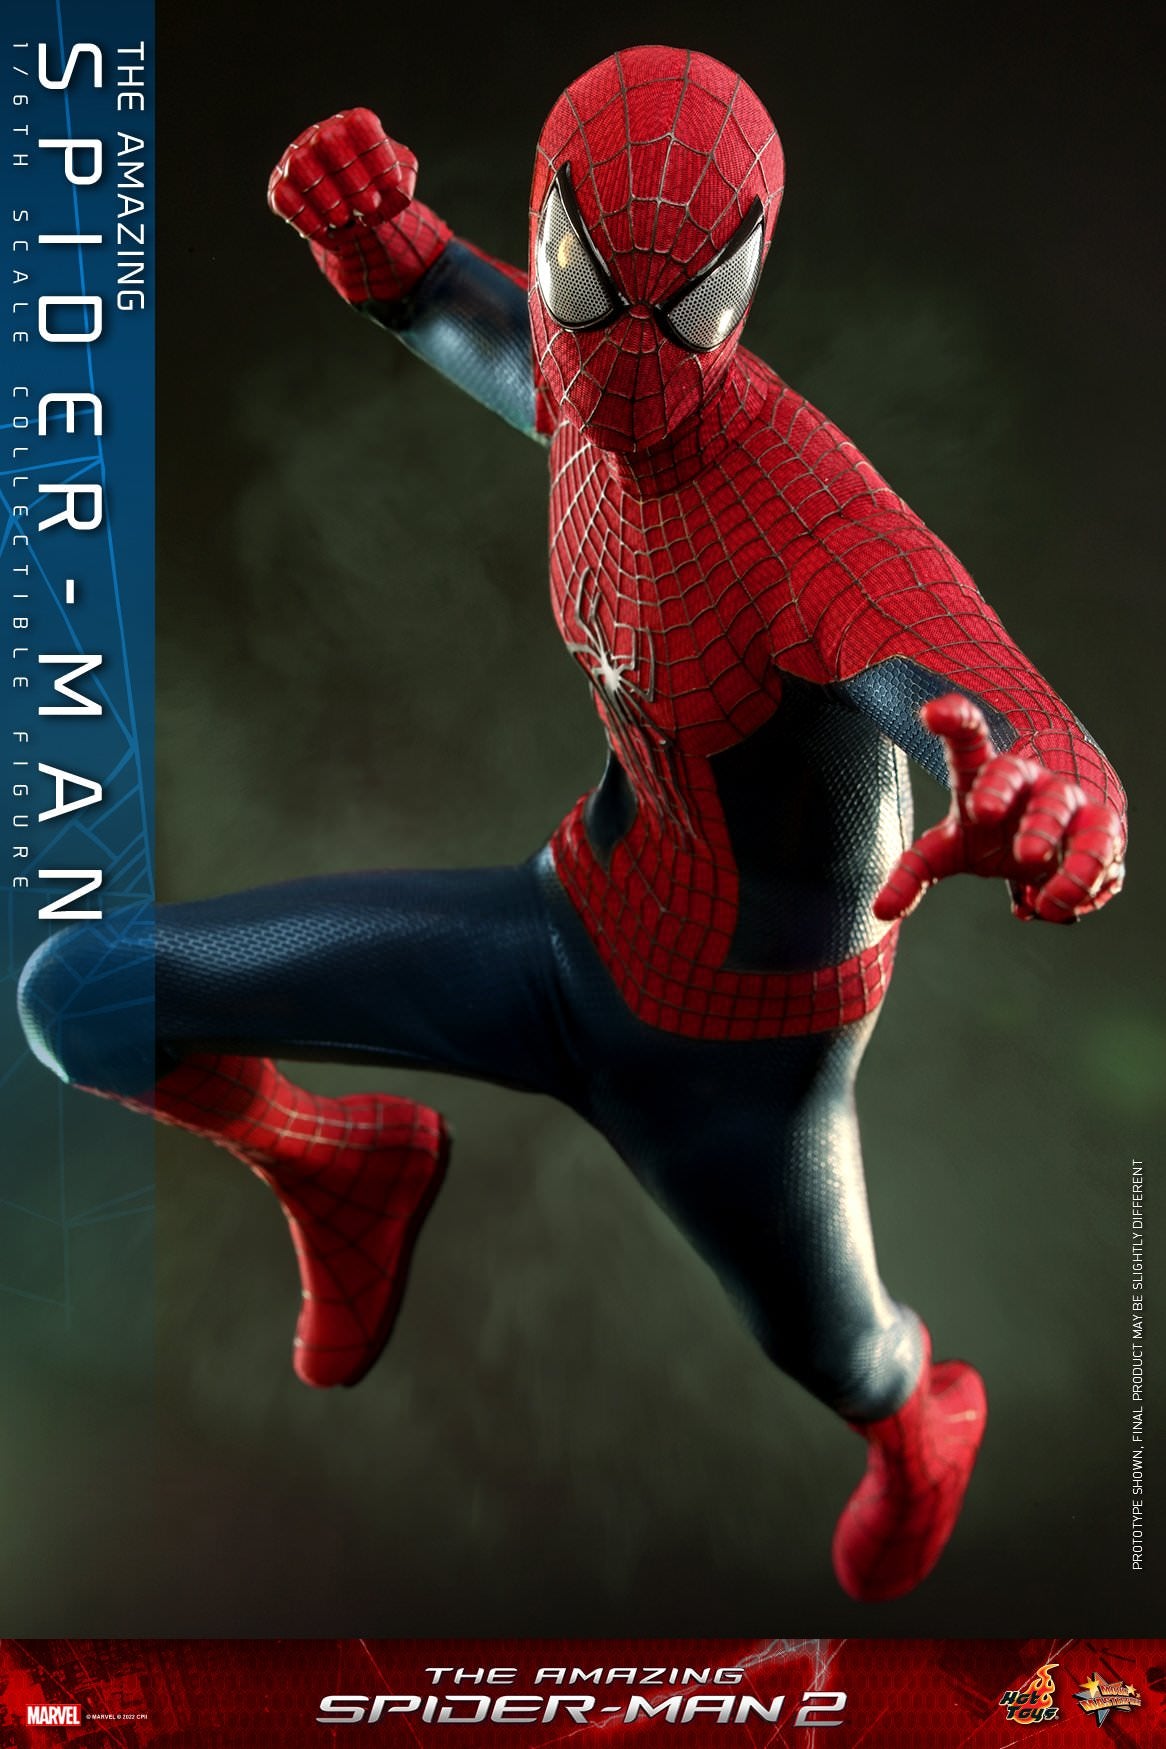 The Amazing Spider-Man: Andrew Garfield: The Amazing Spider-Man 2: Marvel-Hot Toys